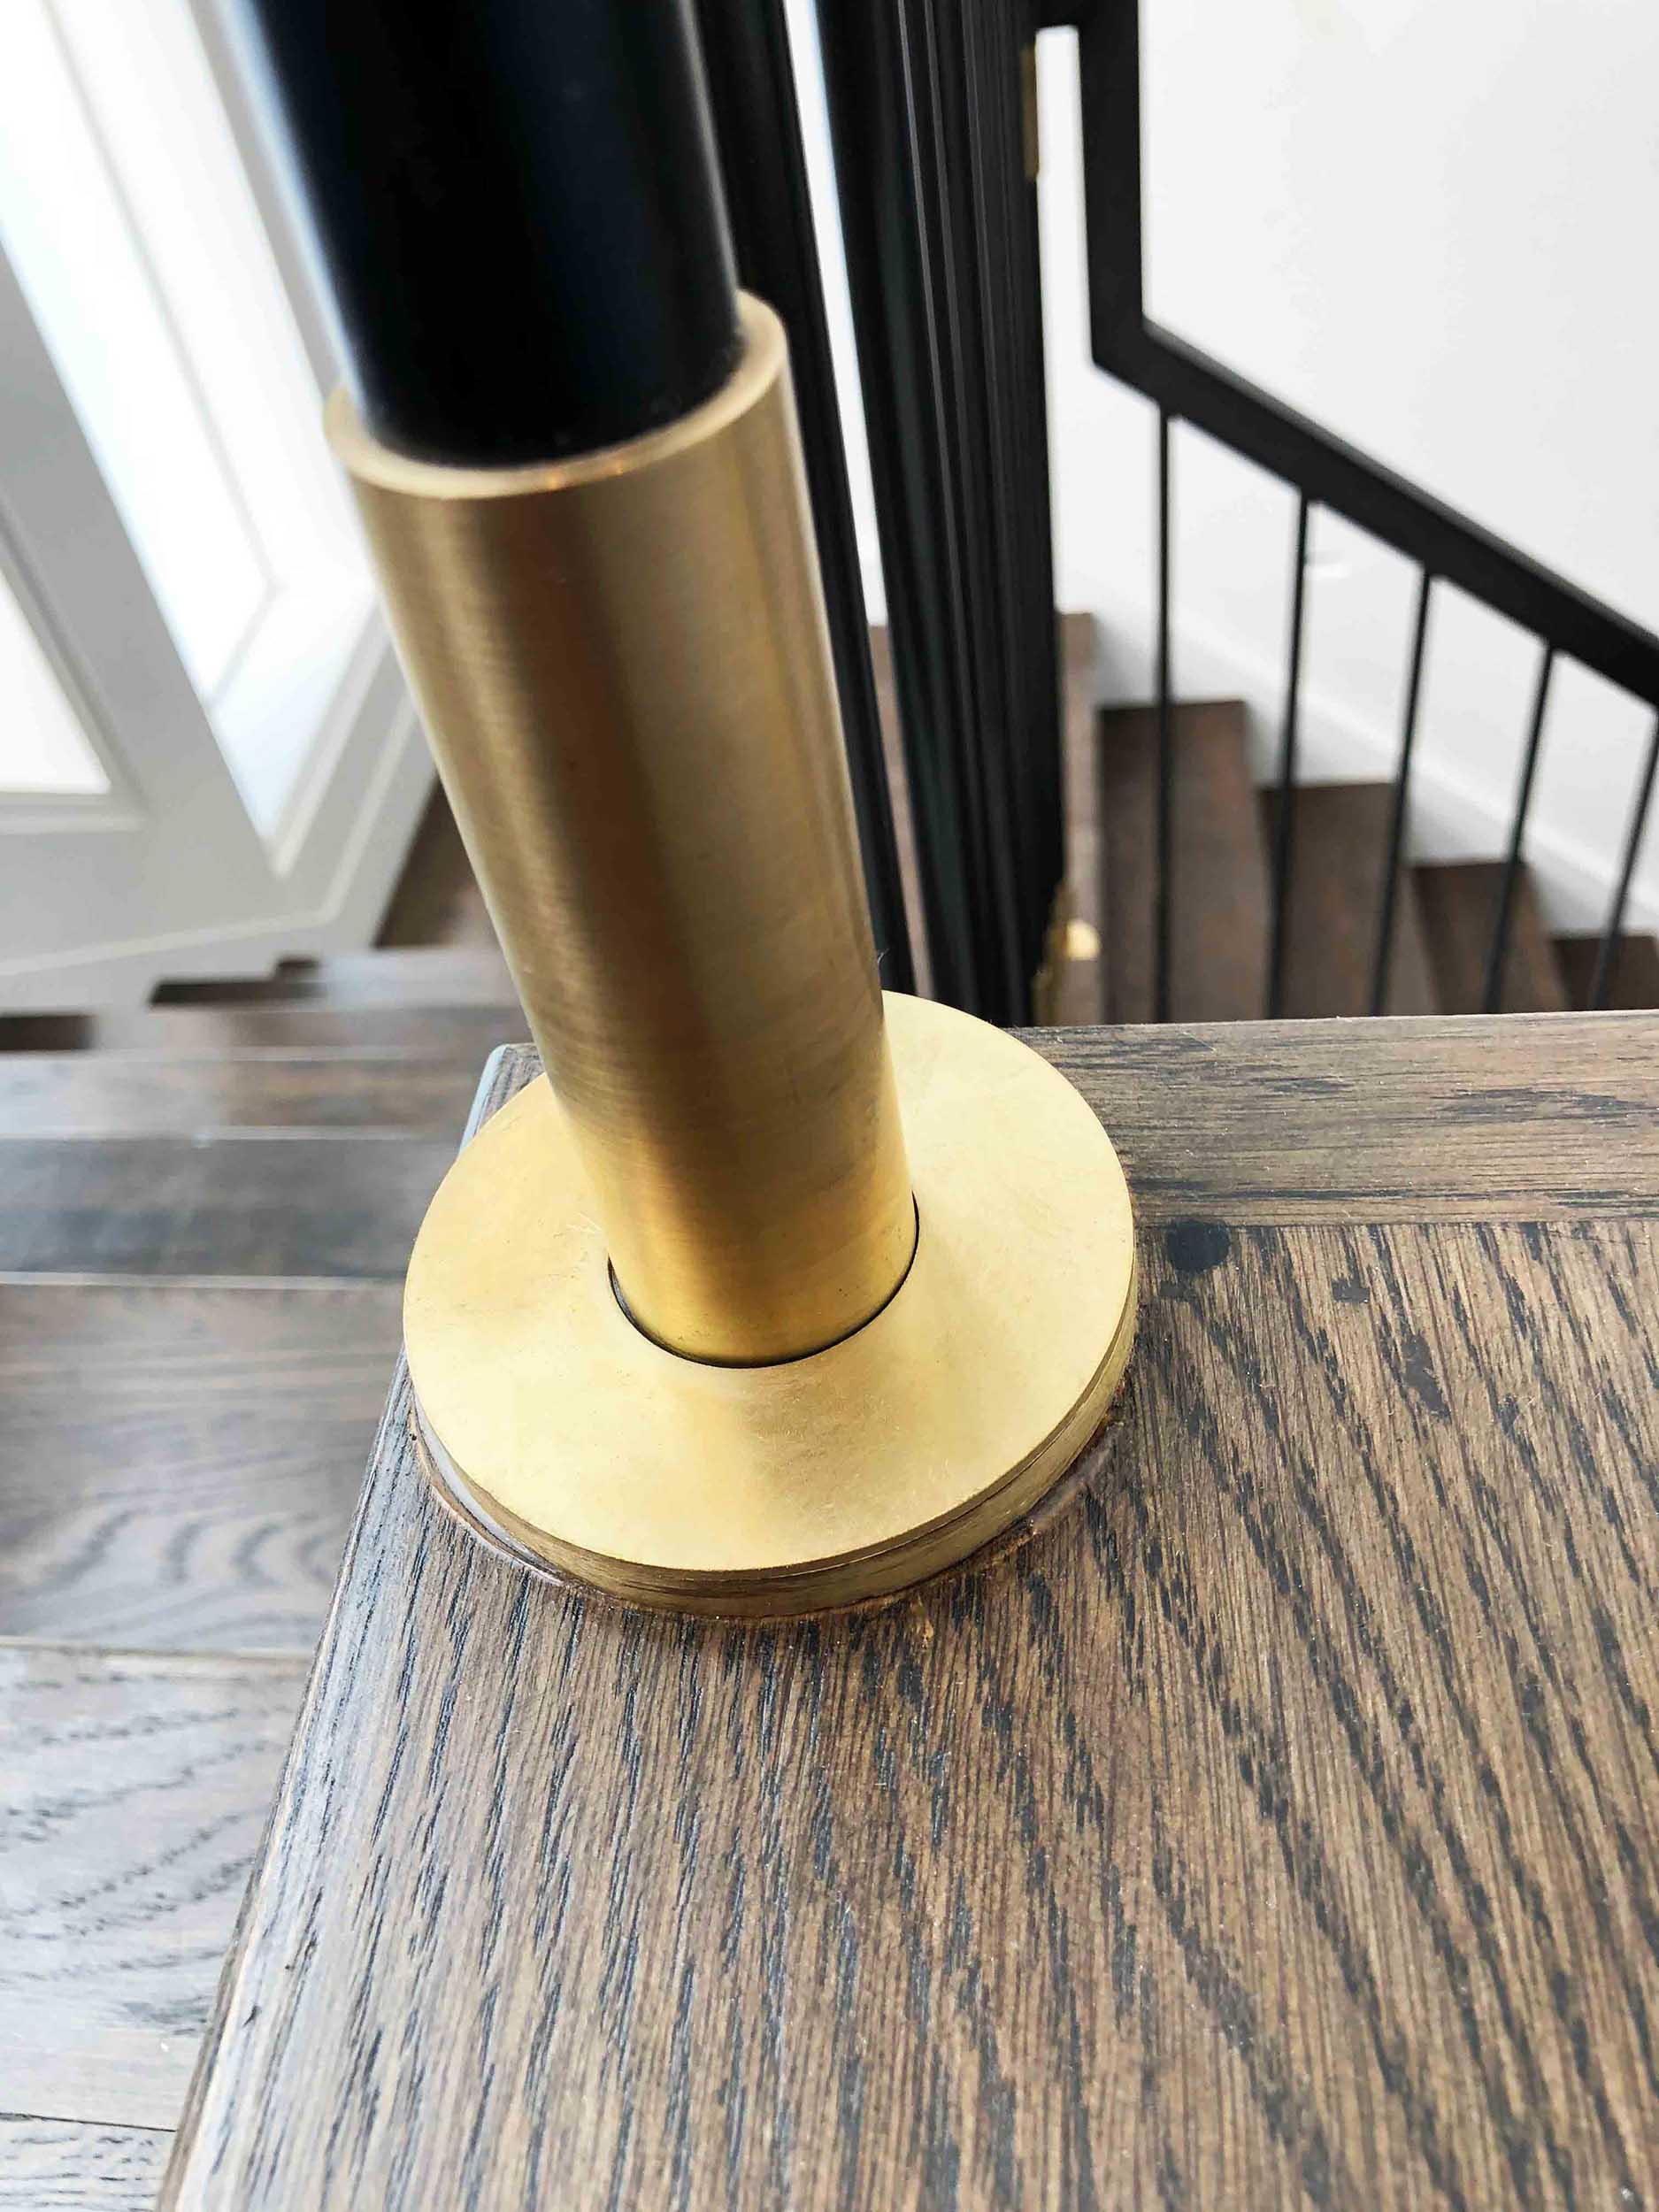 HMH Architectural Metal and Glass - Stair balusters for black railings